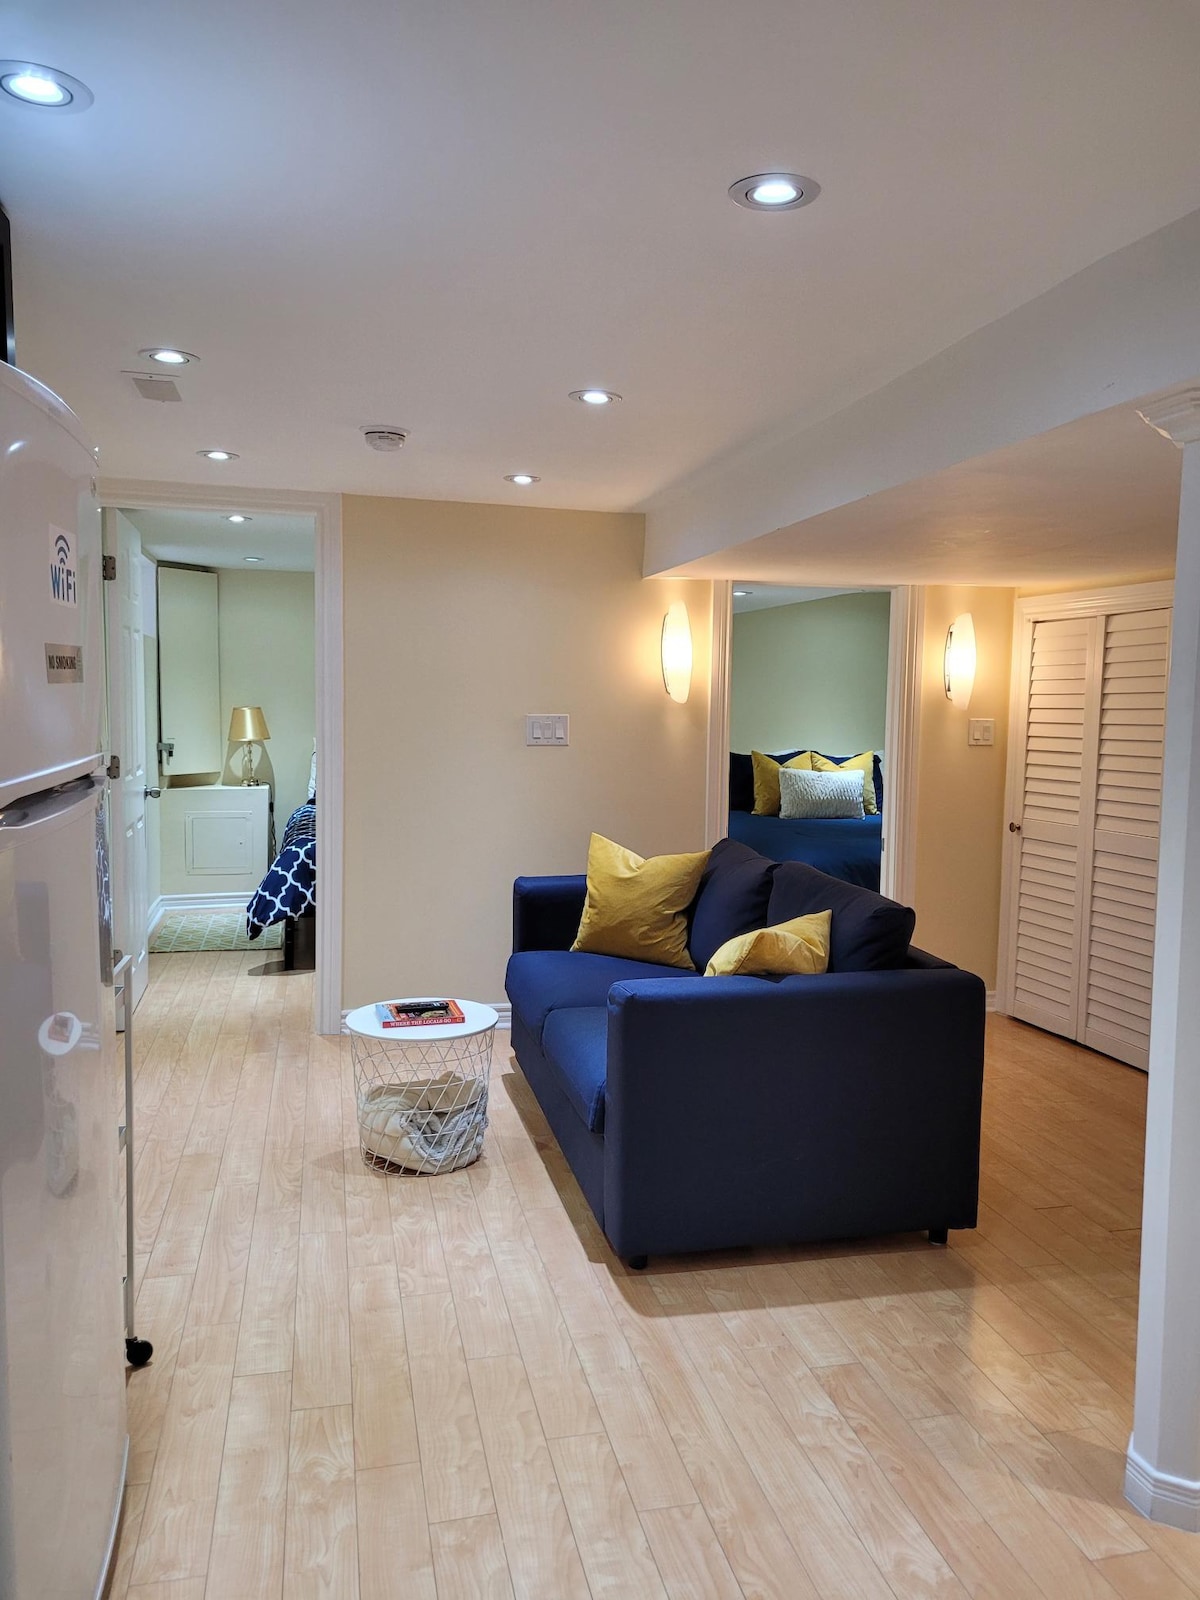 Modern, Bright & Spacious 2BR Private Suite